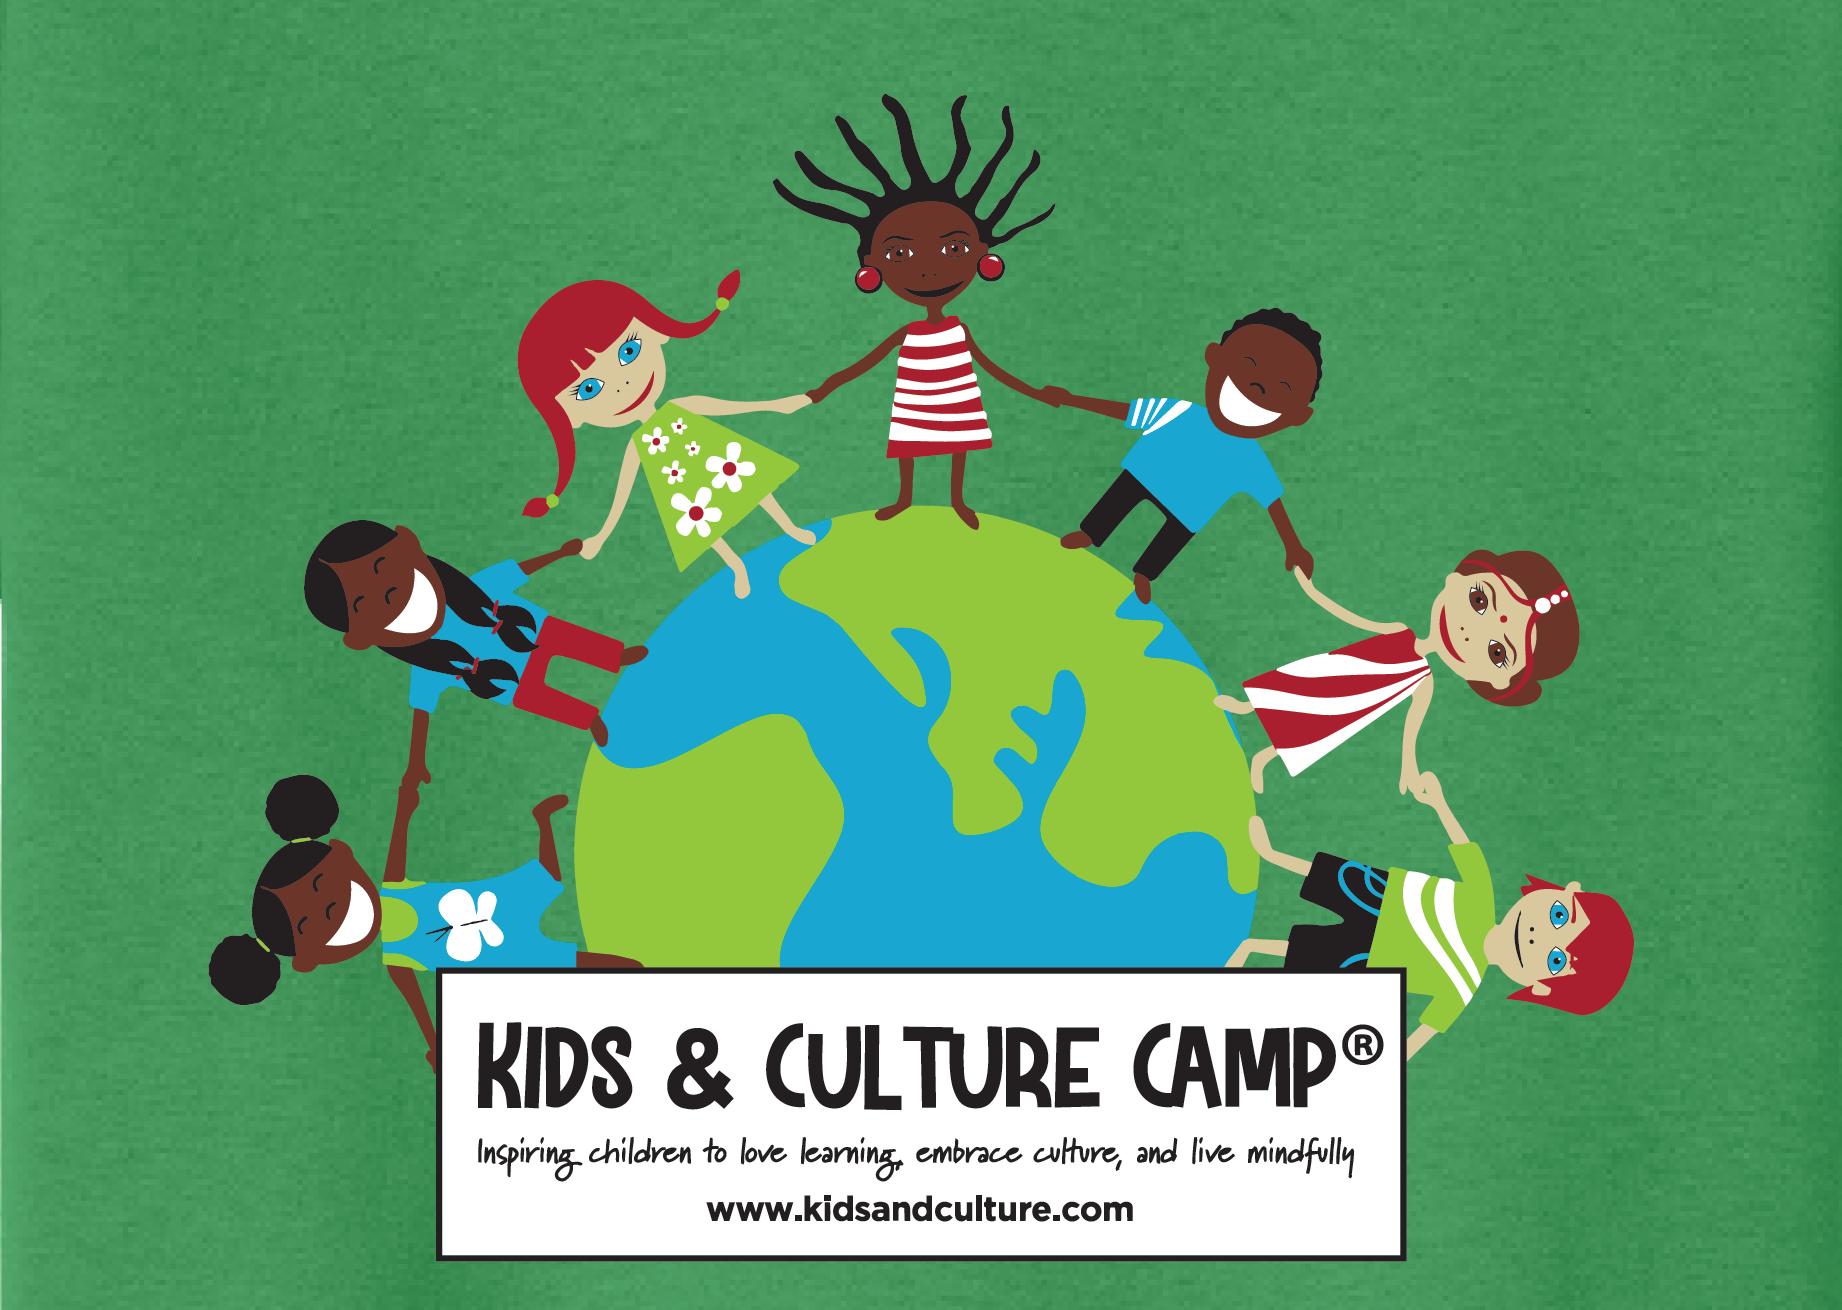 Close up of the Irish green short sleeved youth t-shirt with globe logo. Children of different ethnicities are holding hands around the globe. The words Kids & Culture Camp inspiring children to love learning, embrace culture, and live mindfully are underneath the globe. Kids & Culture Camp's web address is underneath the camp name www.kidsandculture.com